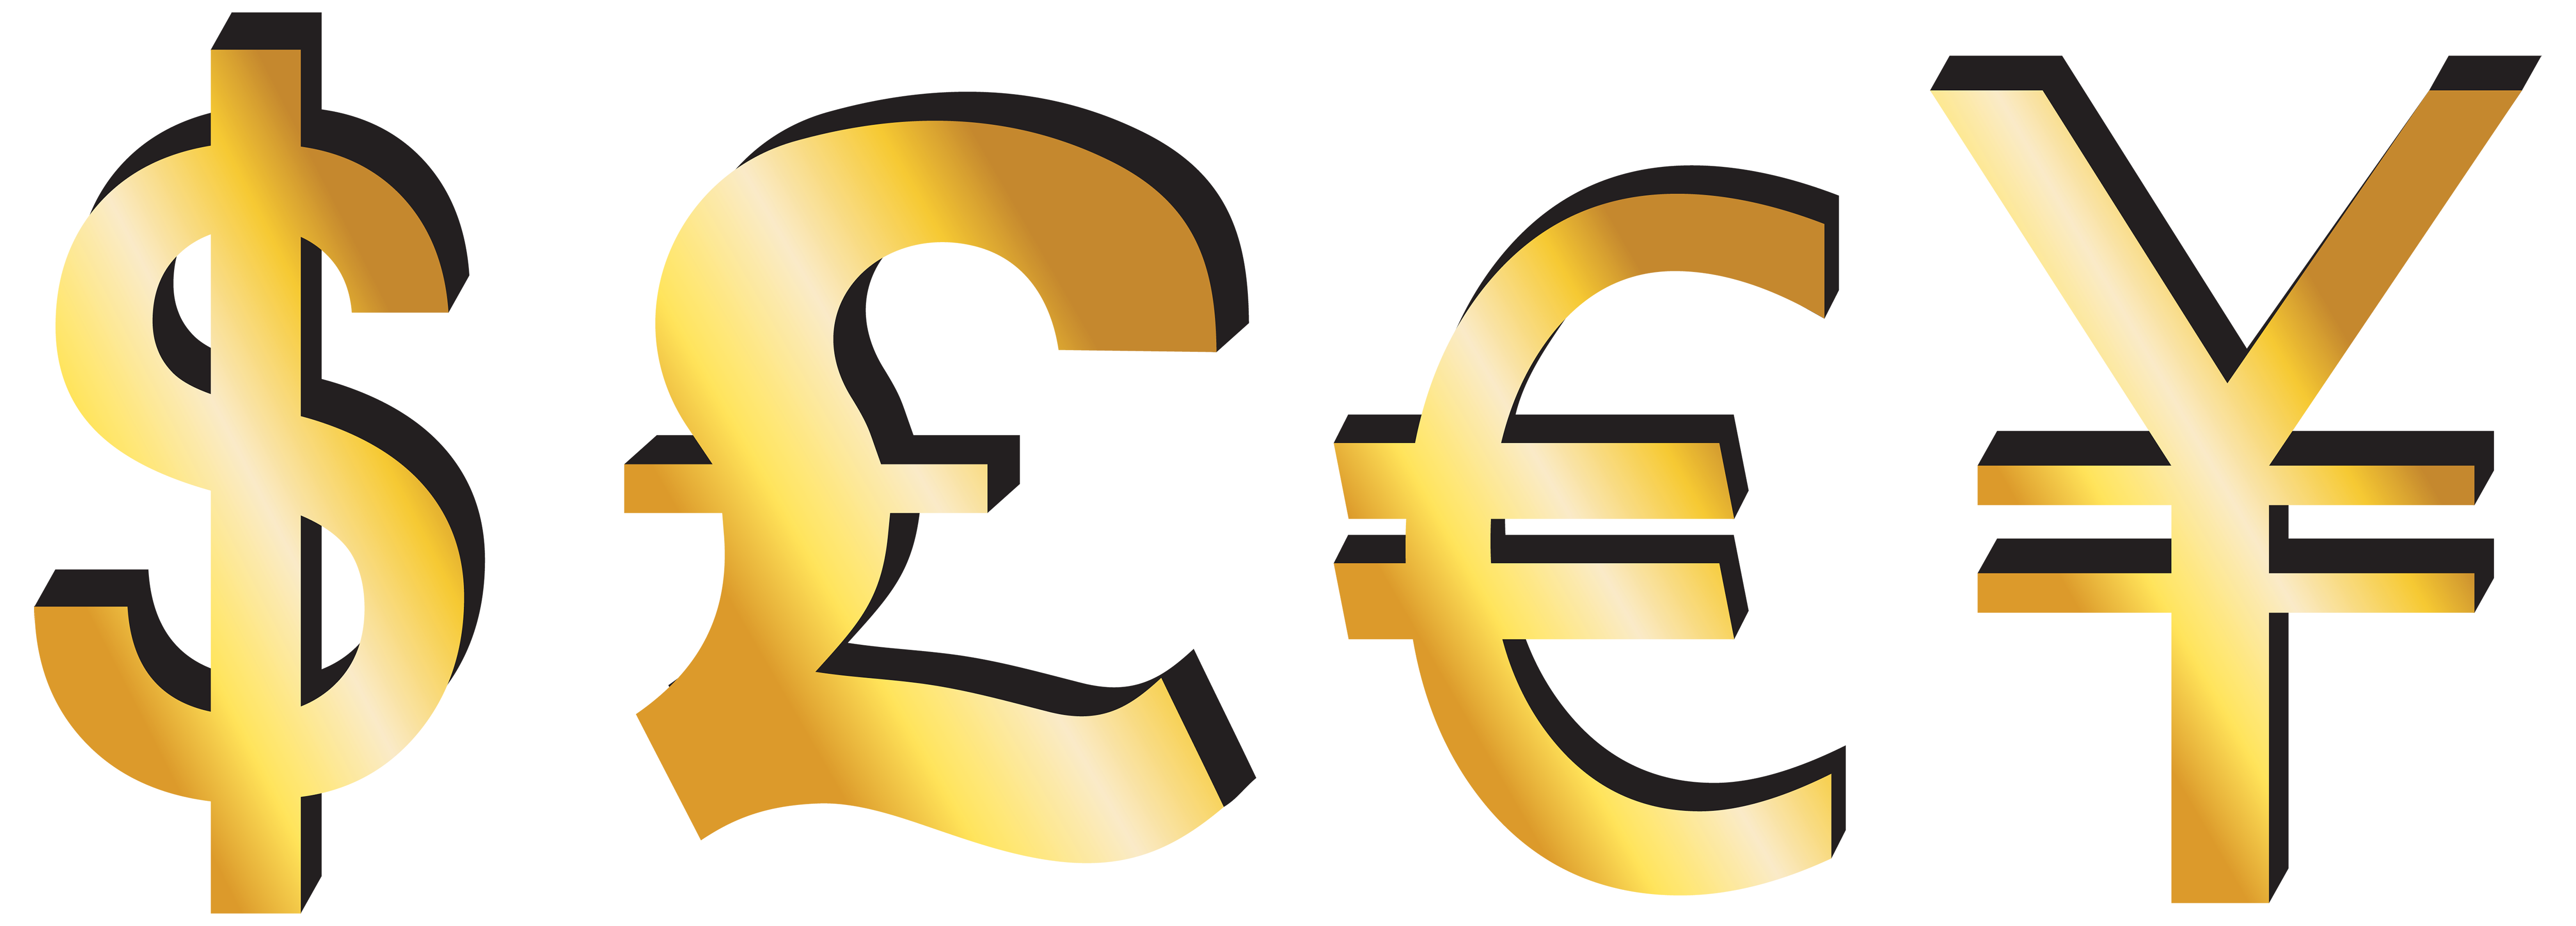 free clipart euro sign - photo #50